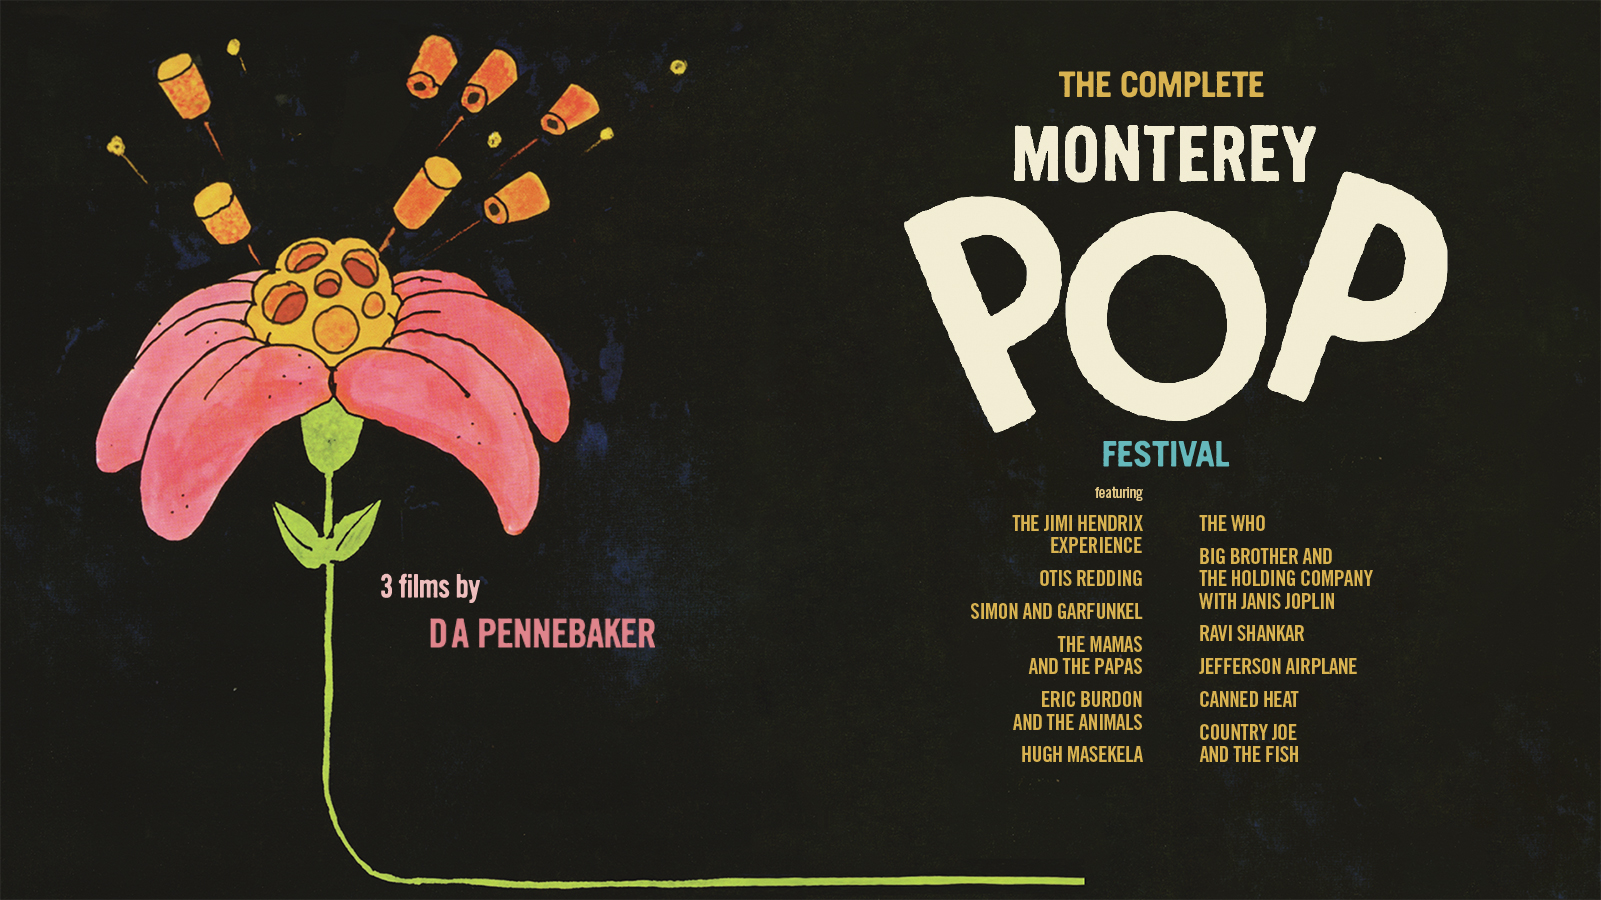 The Complete Monterey Pop Festival - The Criterion Channel